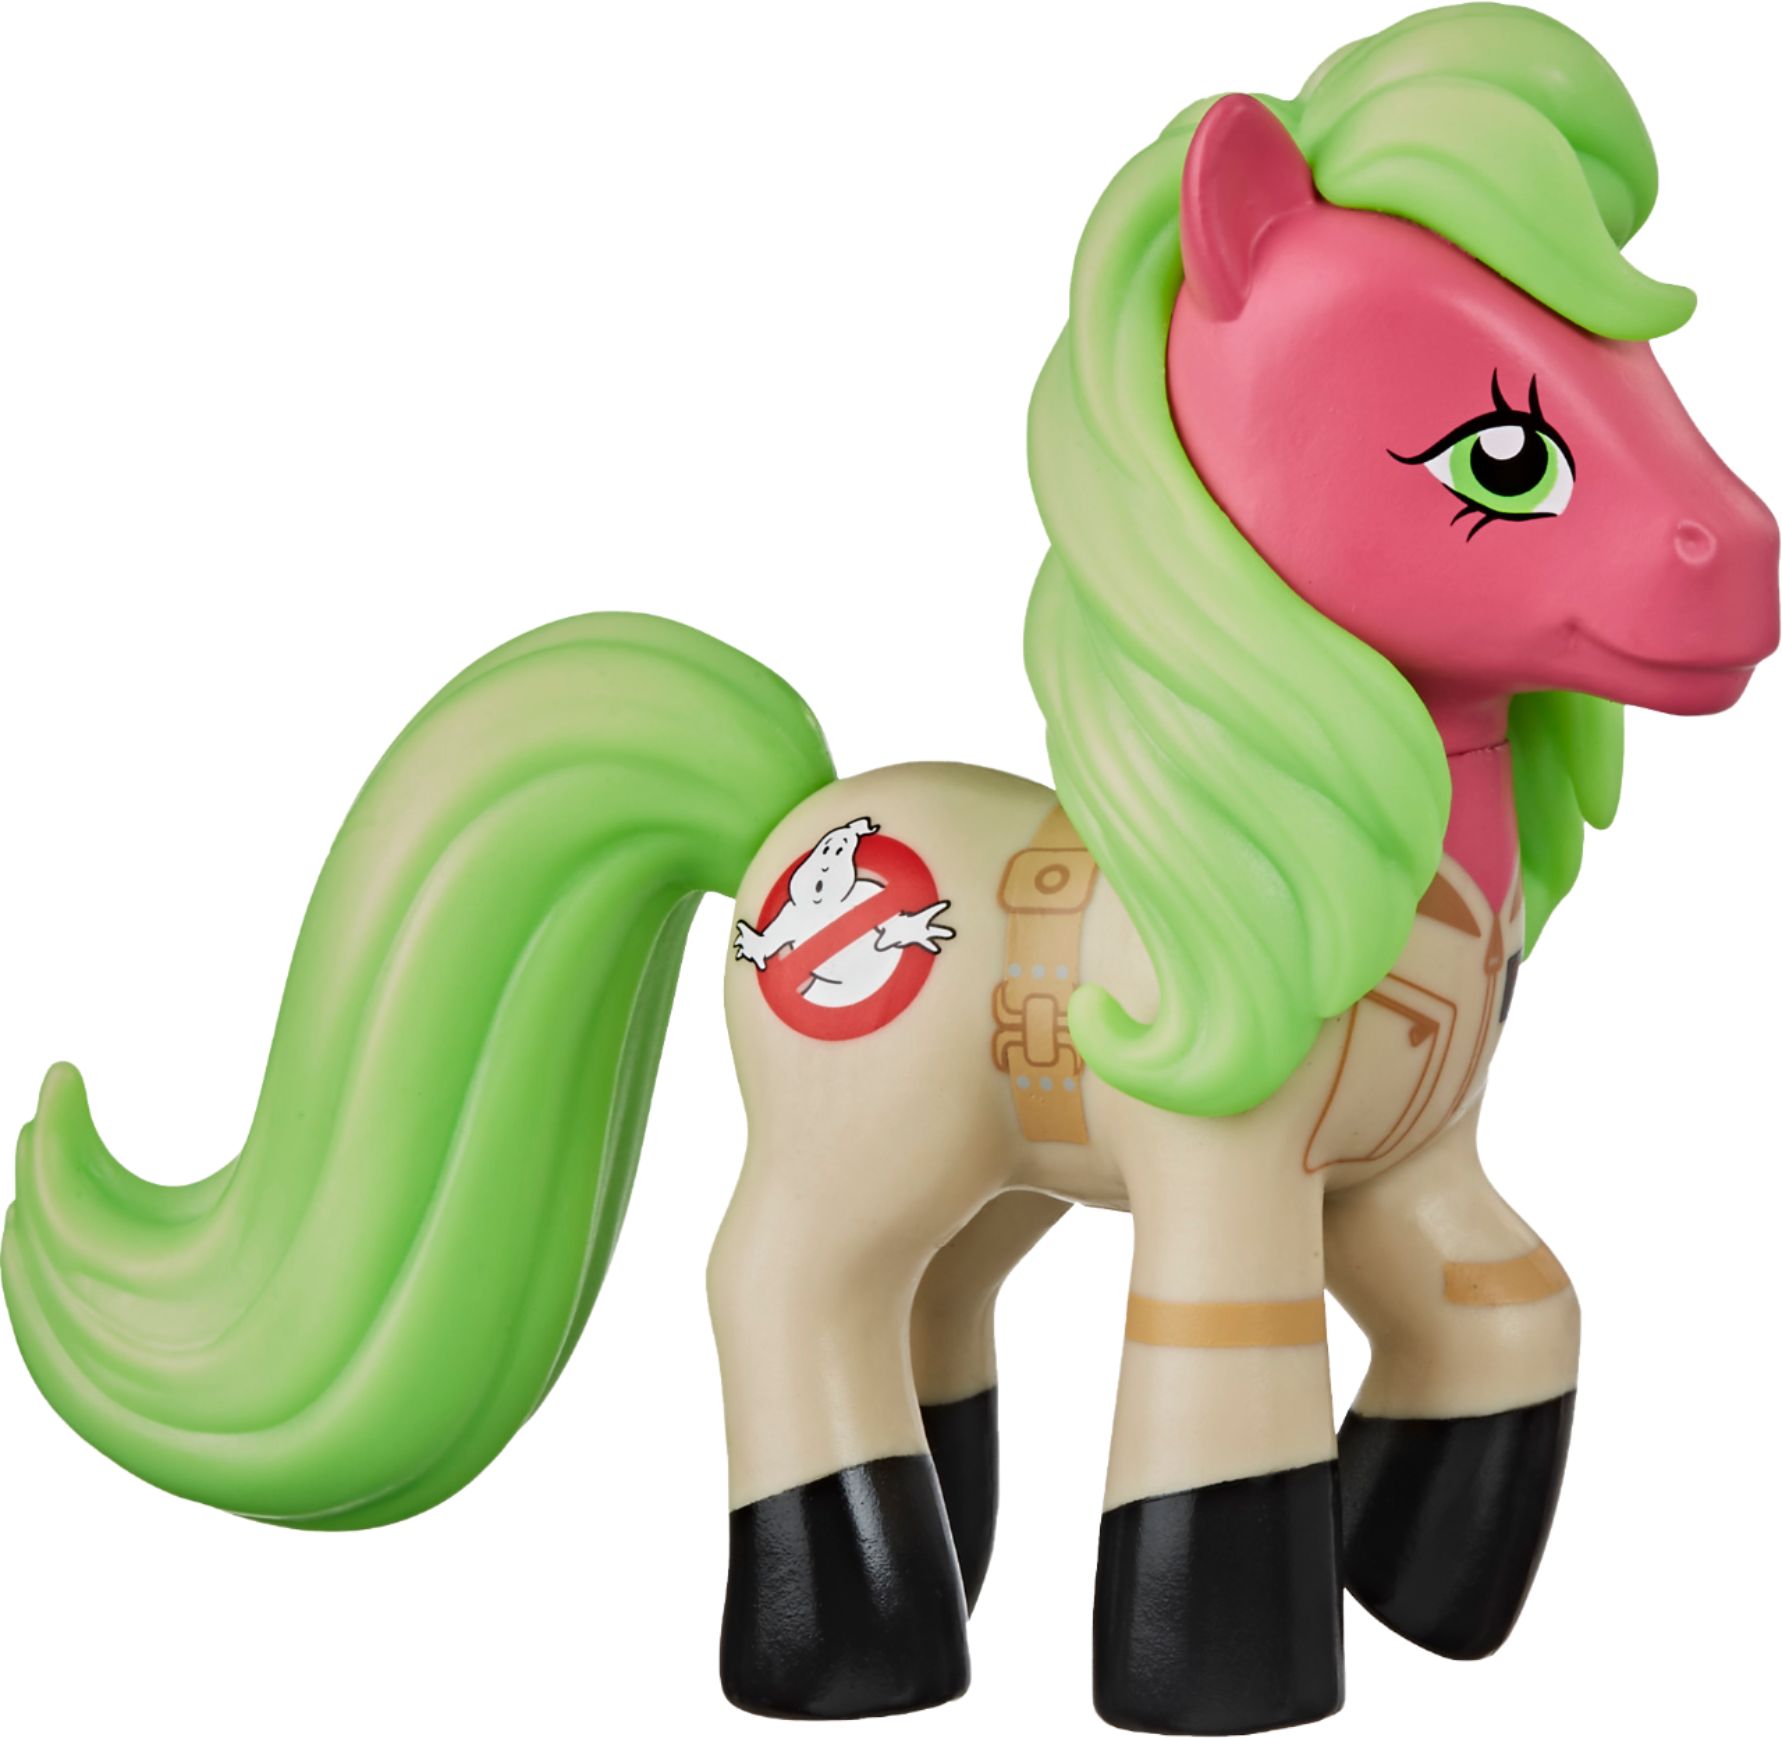 2020 Hasbro Morphin Pink My Little Pony Power Rangers Crossover Collection for sale online 